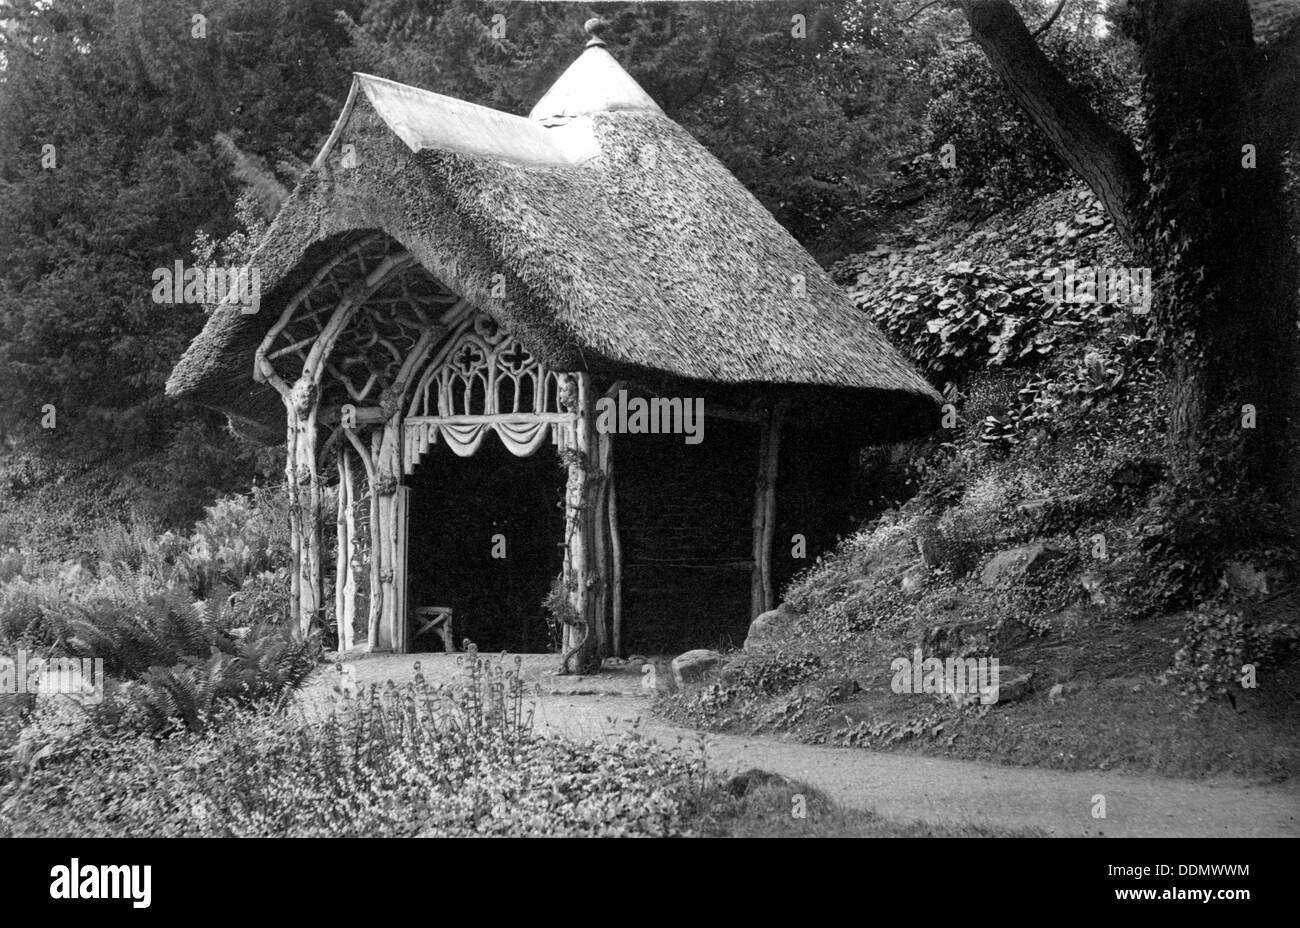 Rustic thatched summerhouse, Belvoir, Leicestershire, c1900. Artist: Farnham Maxwell Lyte Stock Photo